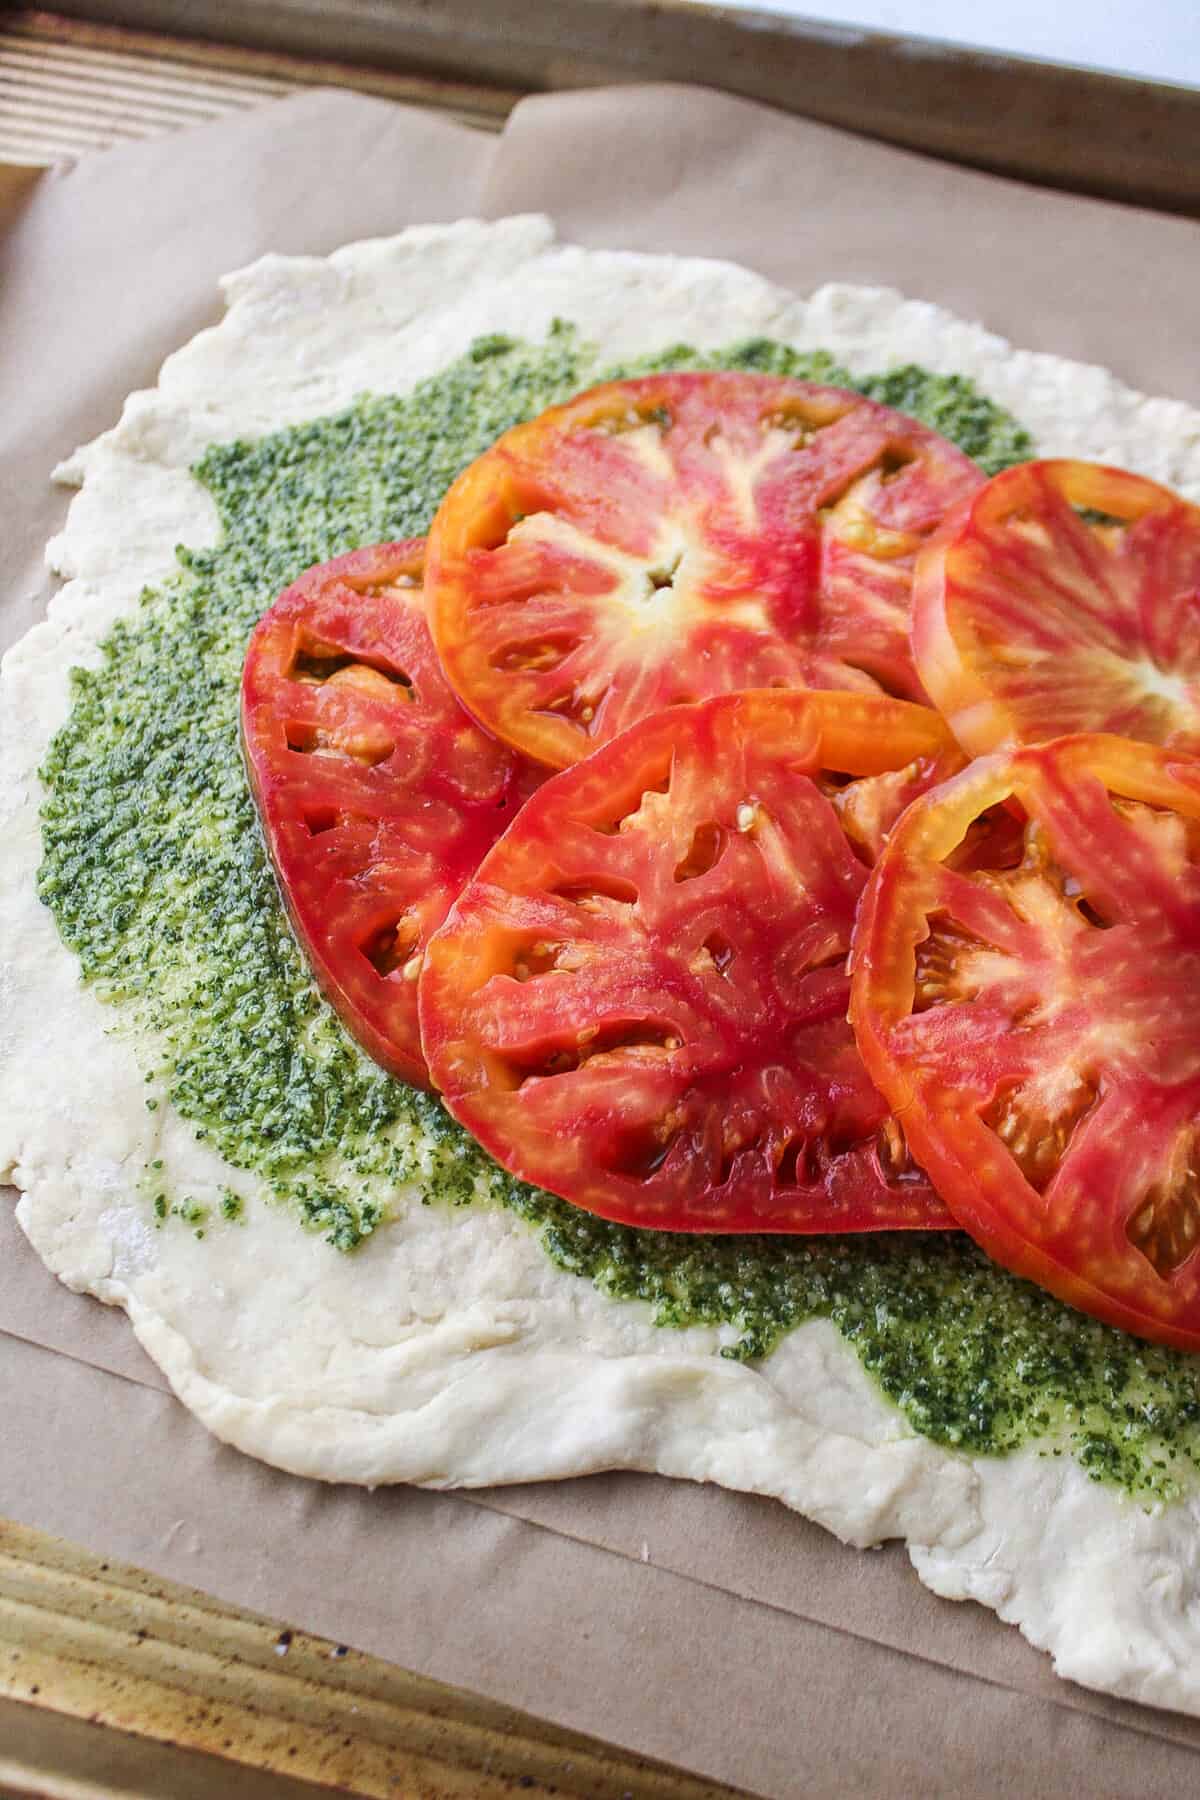 galette dough topped with pesto and sliced tomato